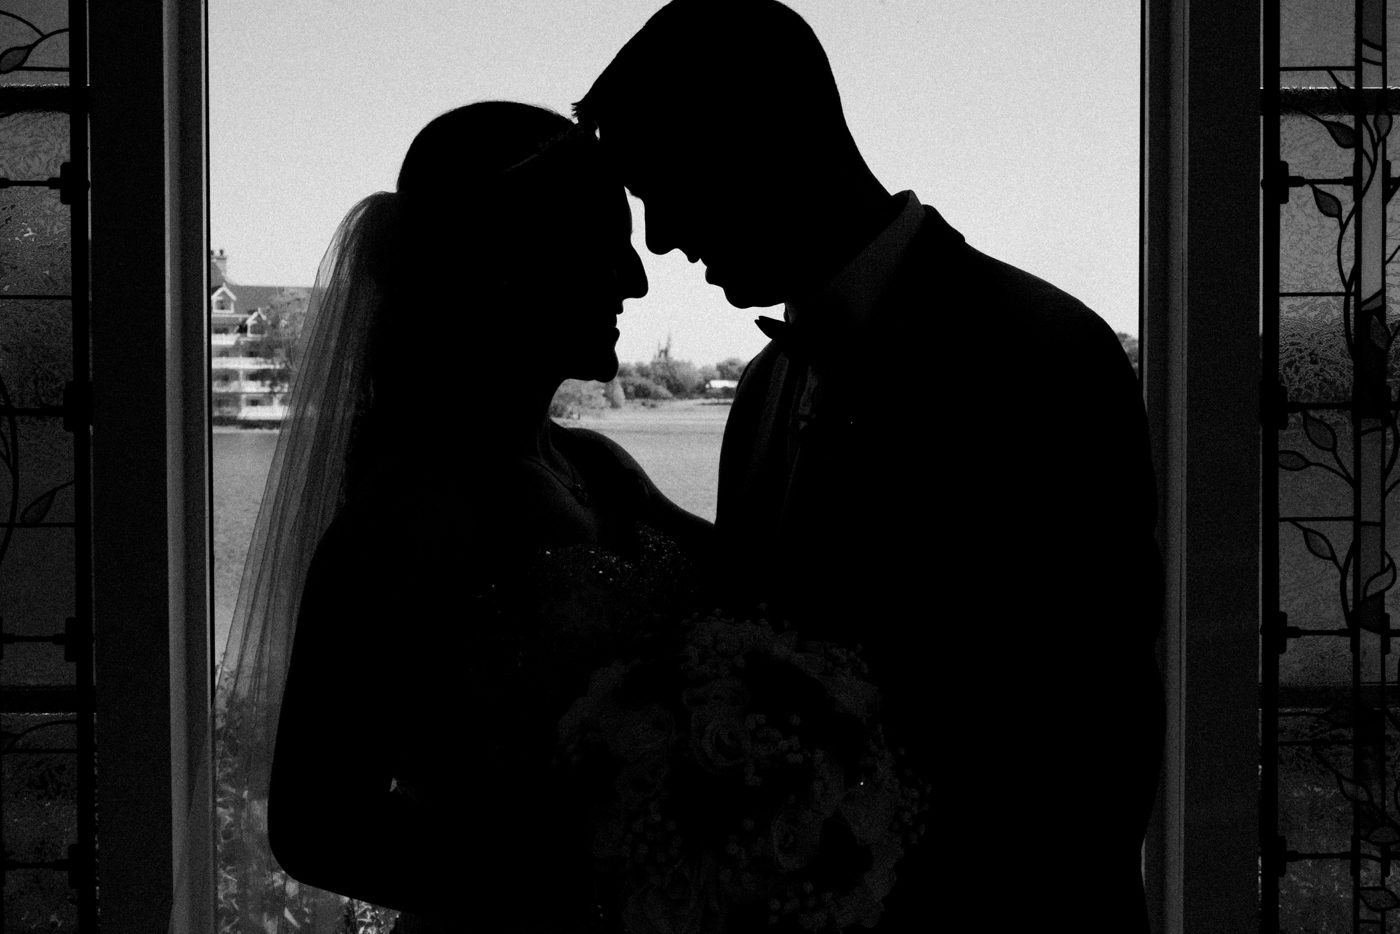 Creative Disney wedding silhouette photo with castle in the background